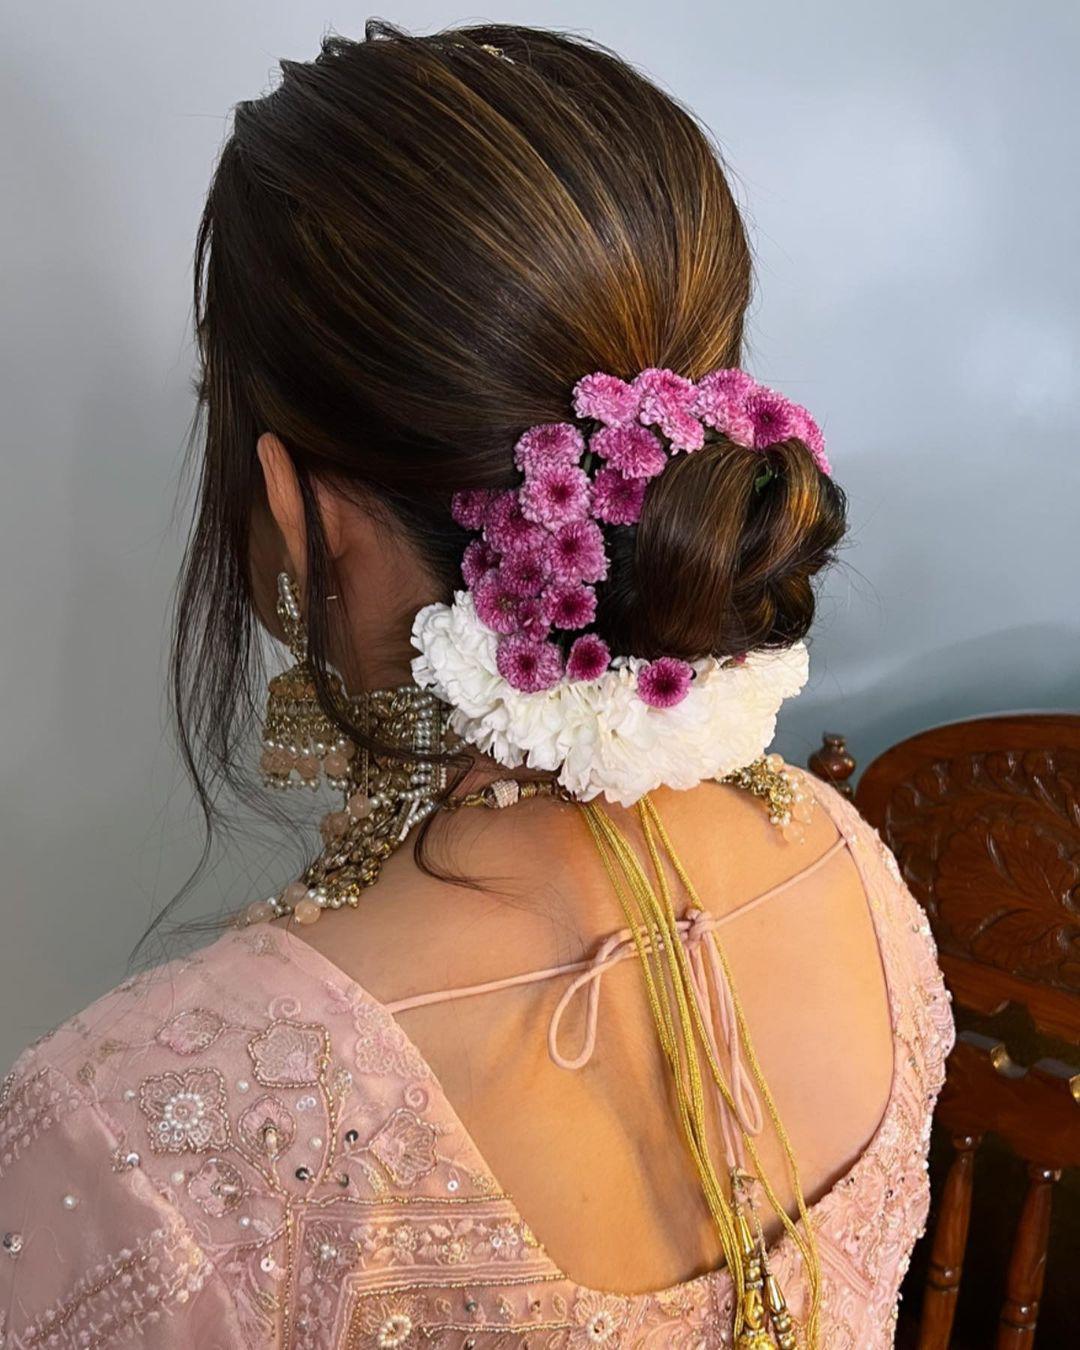 5 Wedding Hairstyles For The Bride's BFF